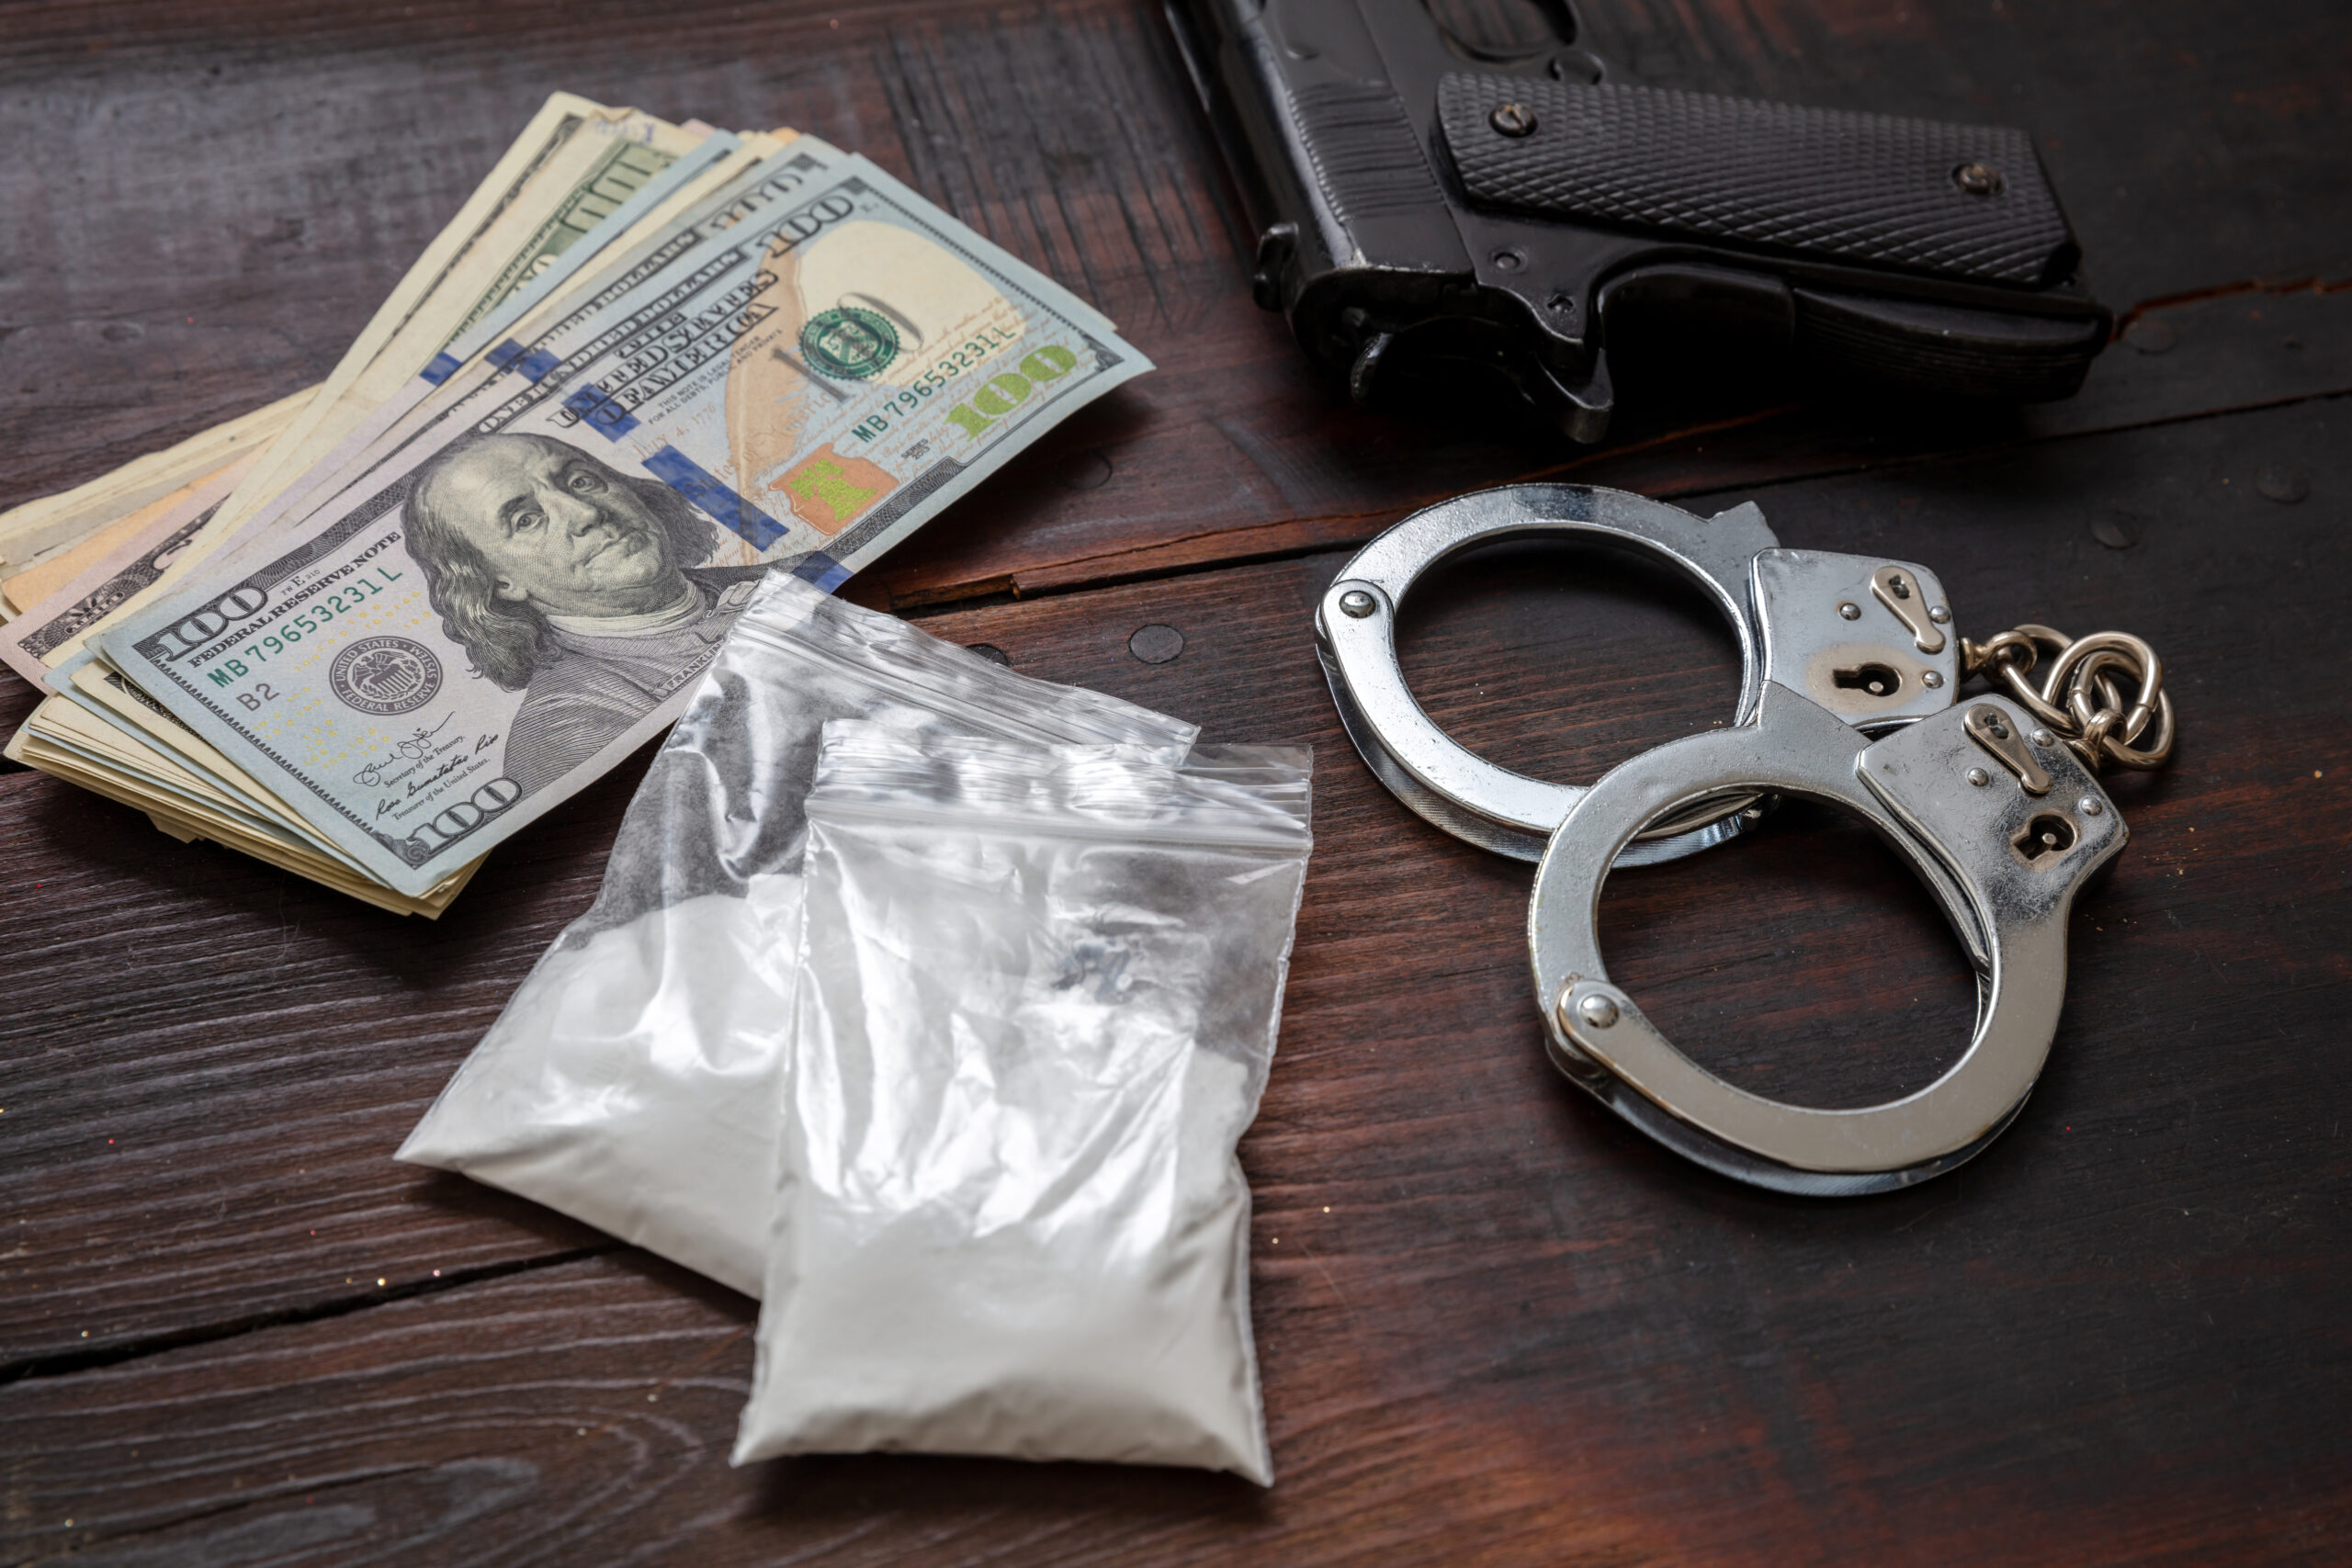 Drugs narcotics possesion and use, arrest and punishment for illegal business concept. Cocaine plastic packets, pistol US dollars and handcuffs.